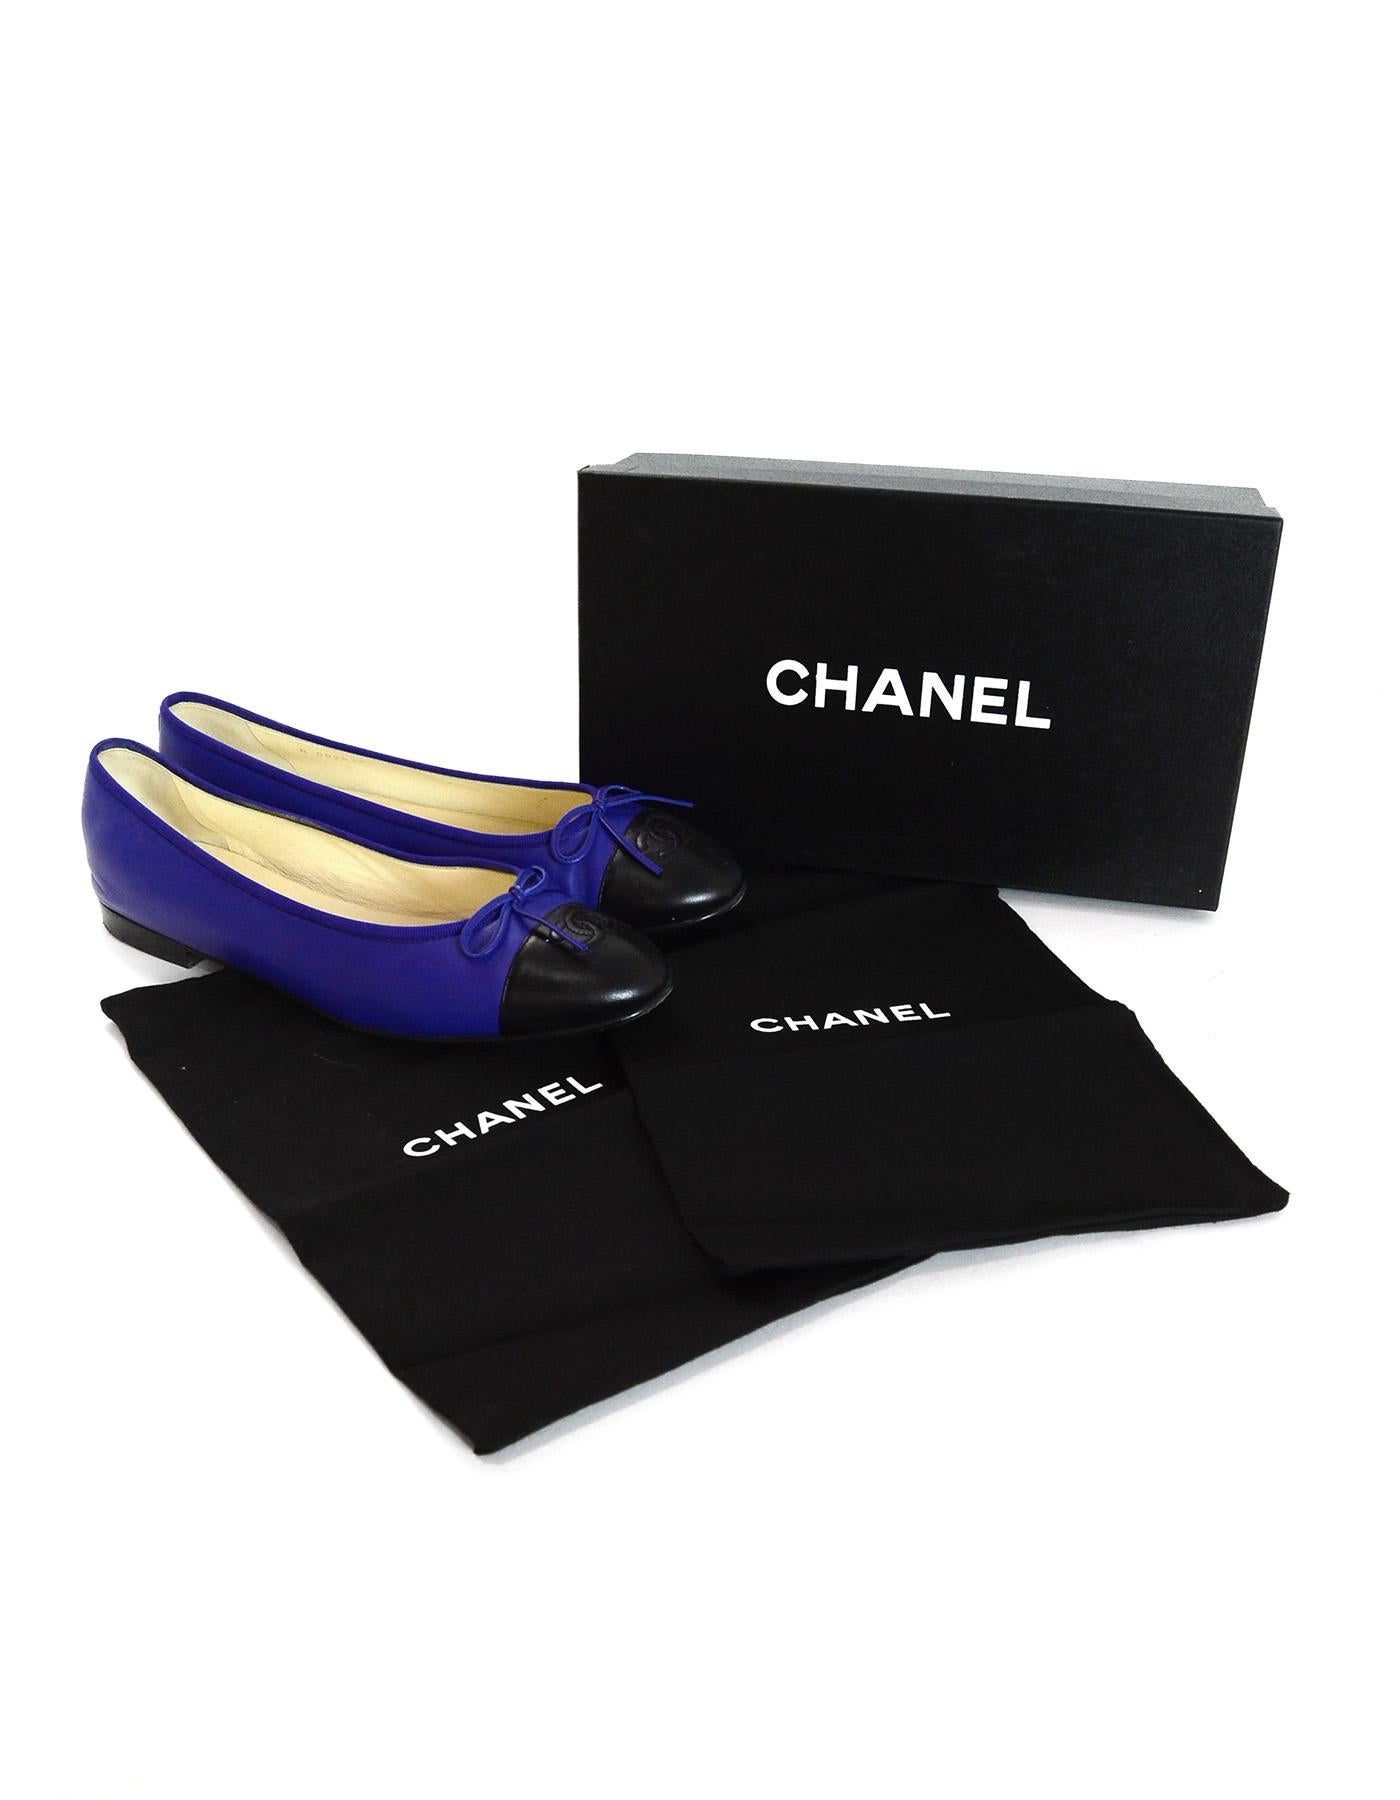 Chanel Royal Blue/Black Leather Cap Toe CC Ballet Flats Sz 42

Made In: Italy
Year of Production: 2013
Color: Royal blue and black
Materials: Leather
Closure/Opening: Slide on
Overall Condition: Excellent pre-owned condition
Estimated Retail: $750 +